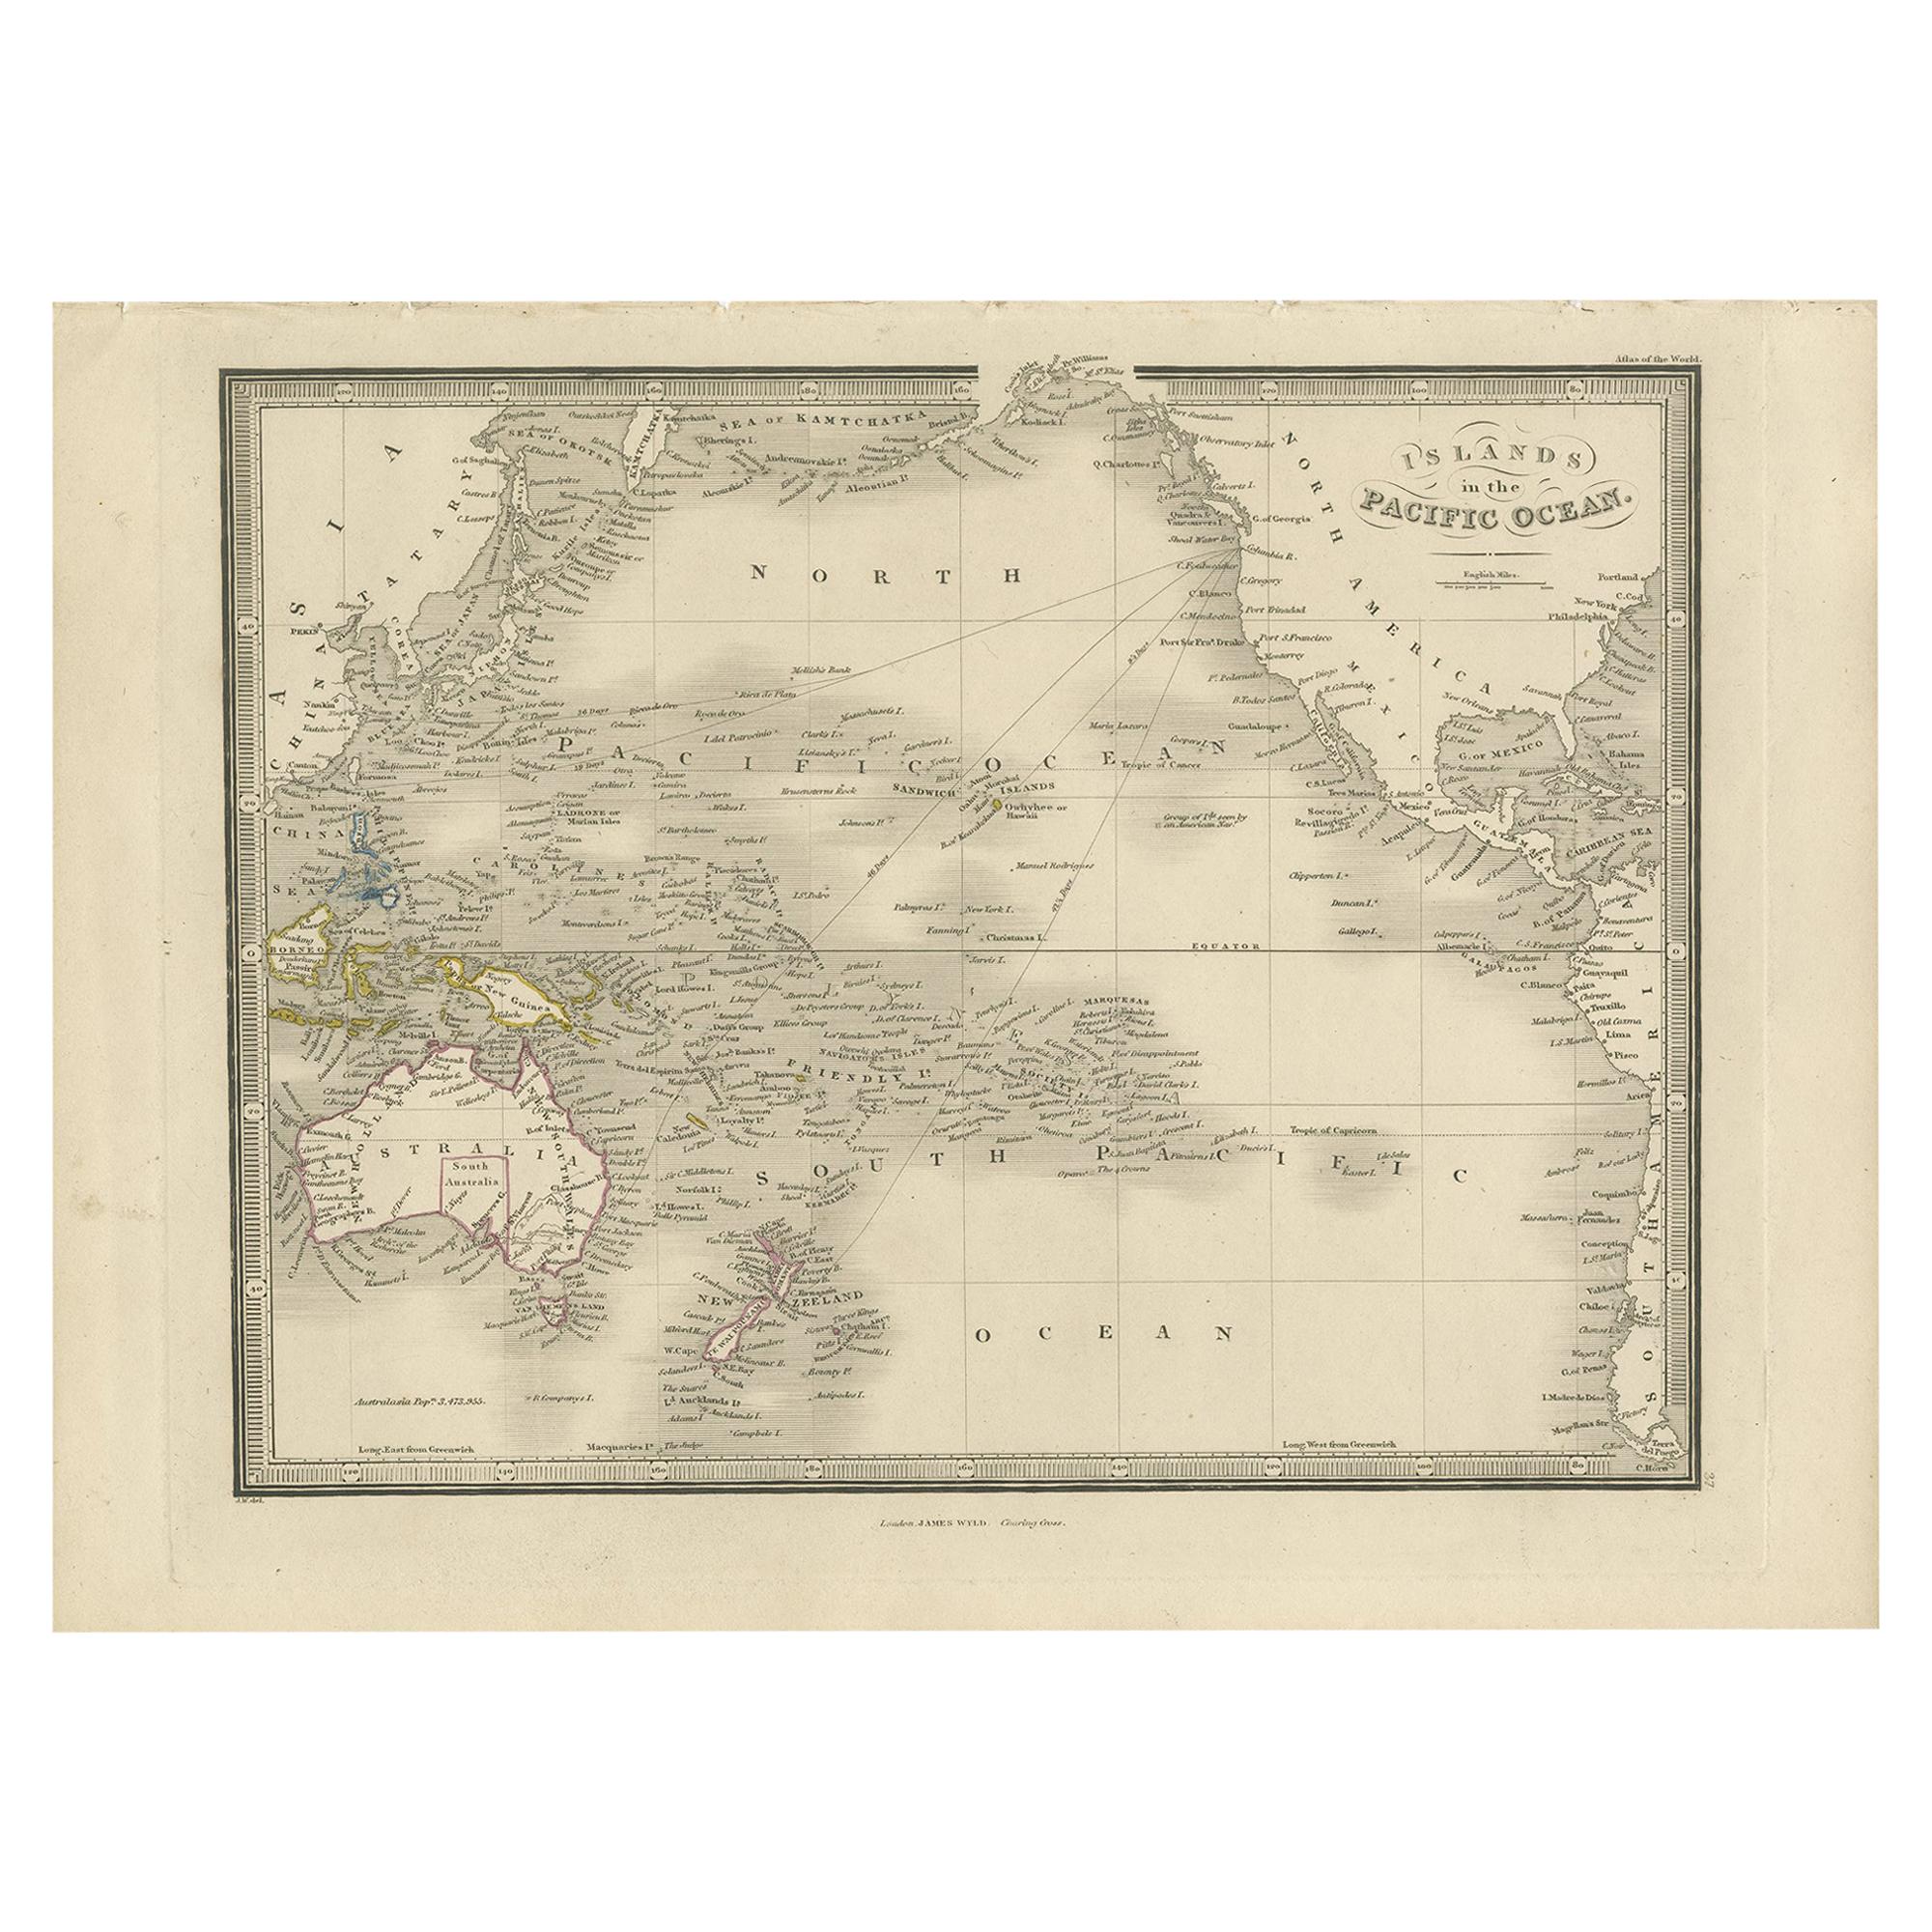 Antique Map of the Islands in the Pacific Ocean by Wyld, '1845'